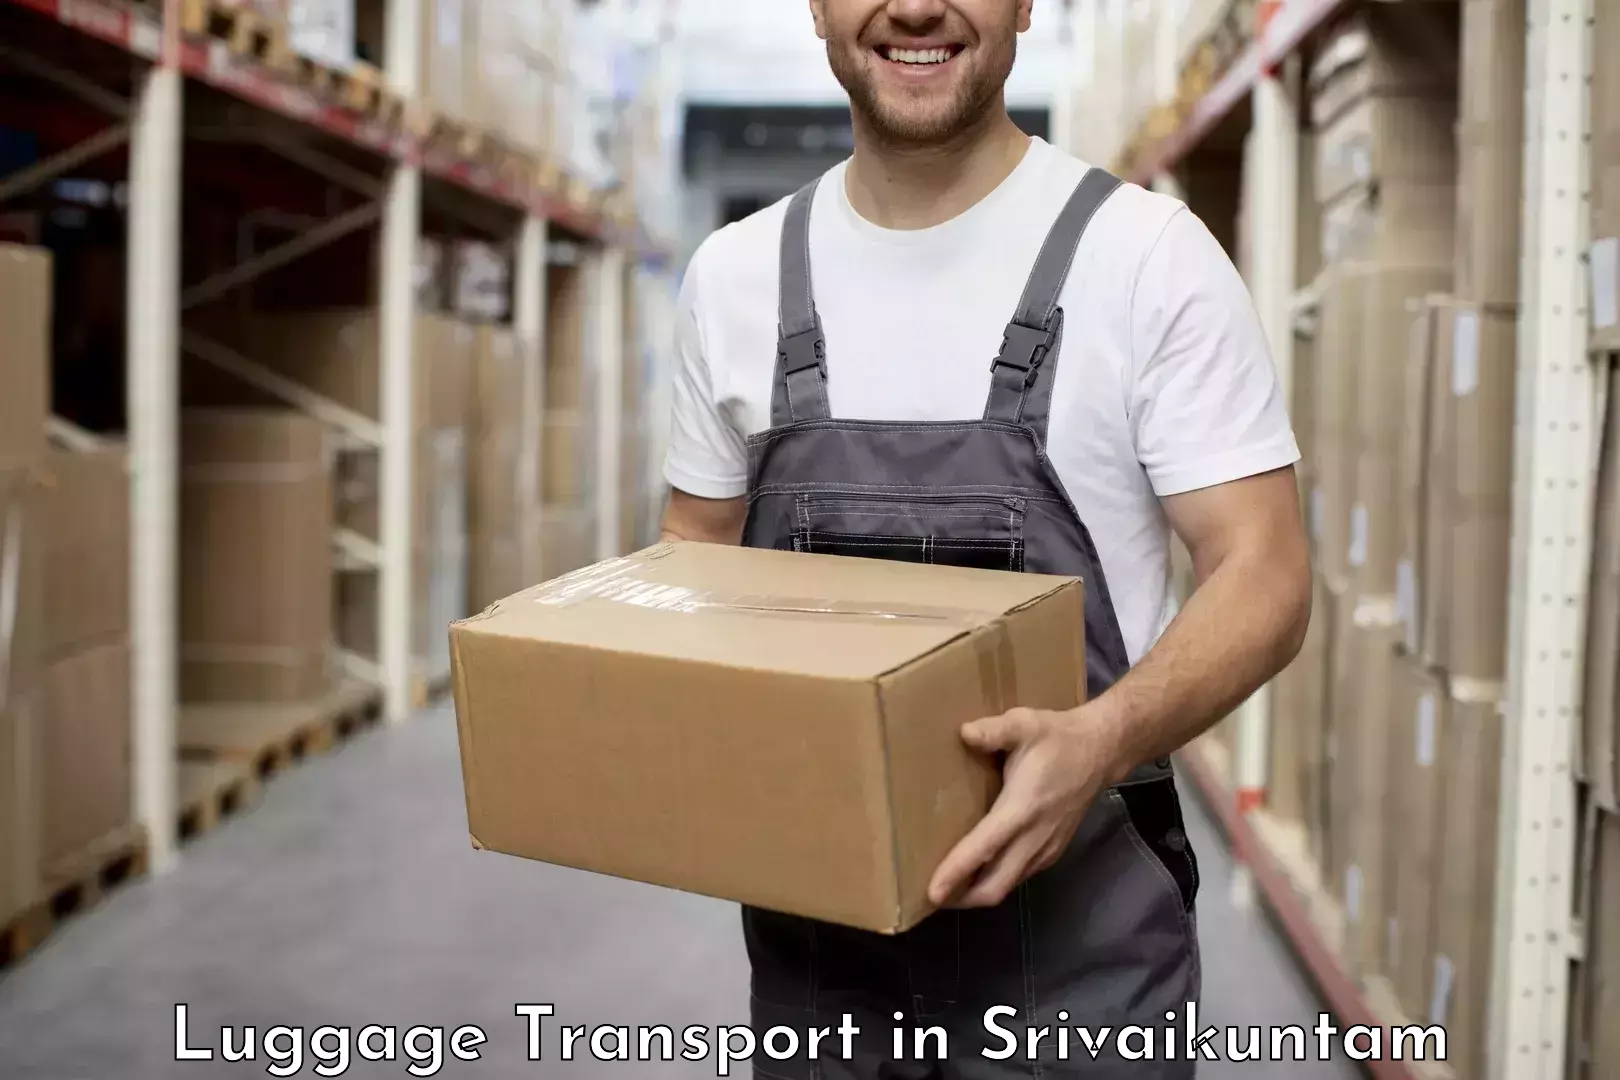 Luggage shipping trends in Srivaikuntam